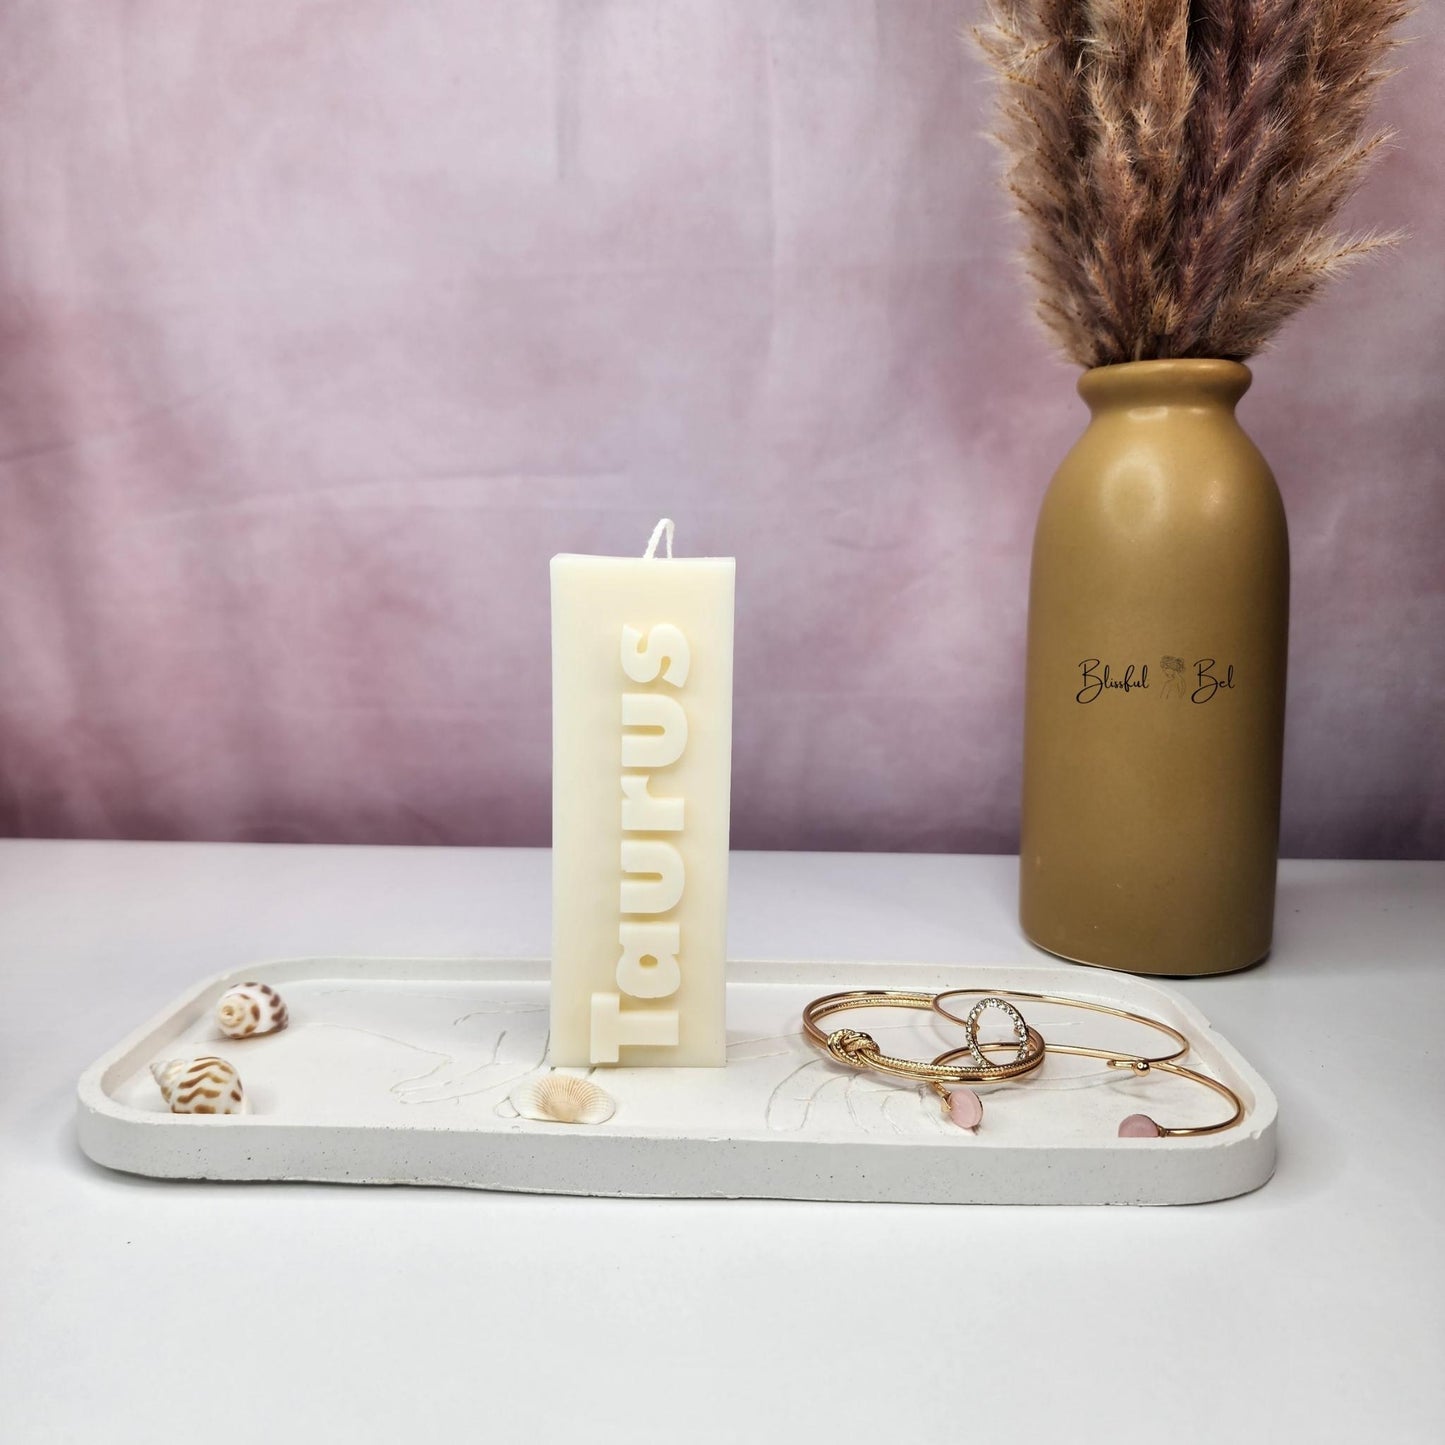 TAURUS Zodiac Sign Astrology Candle